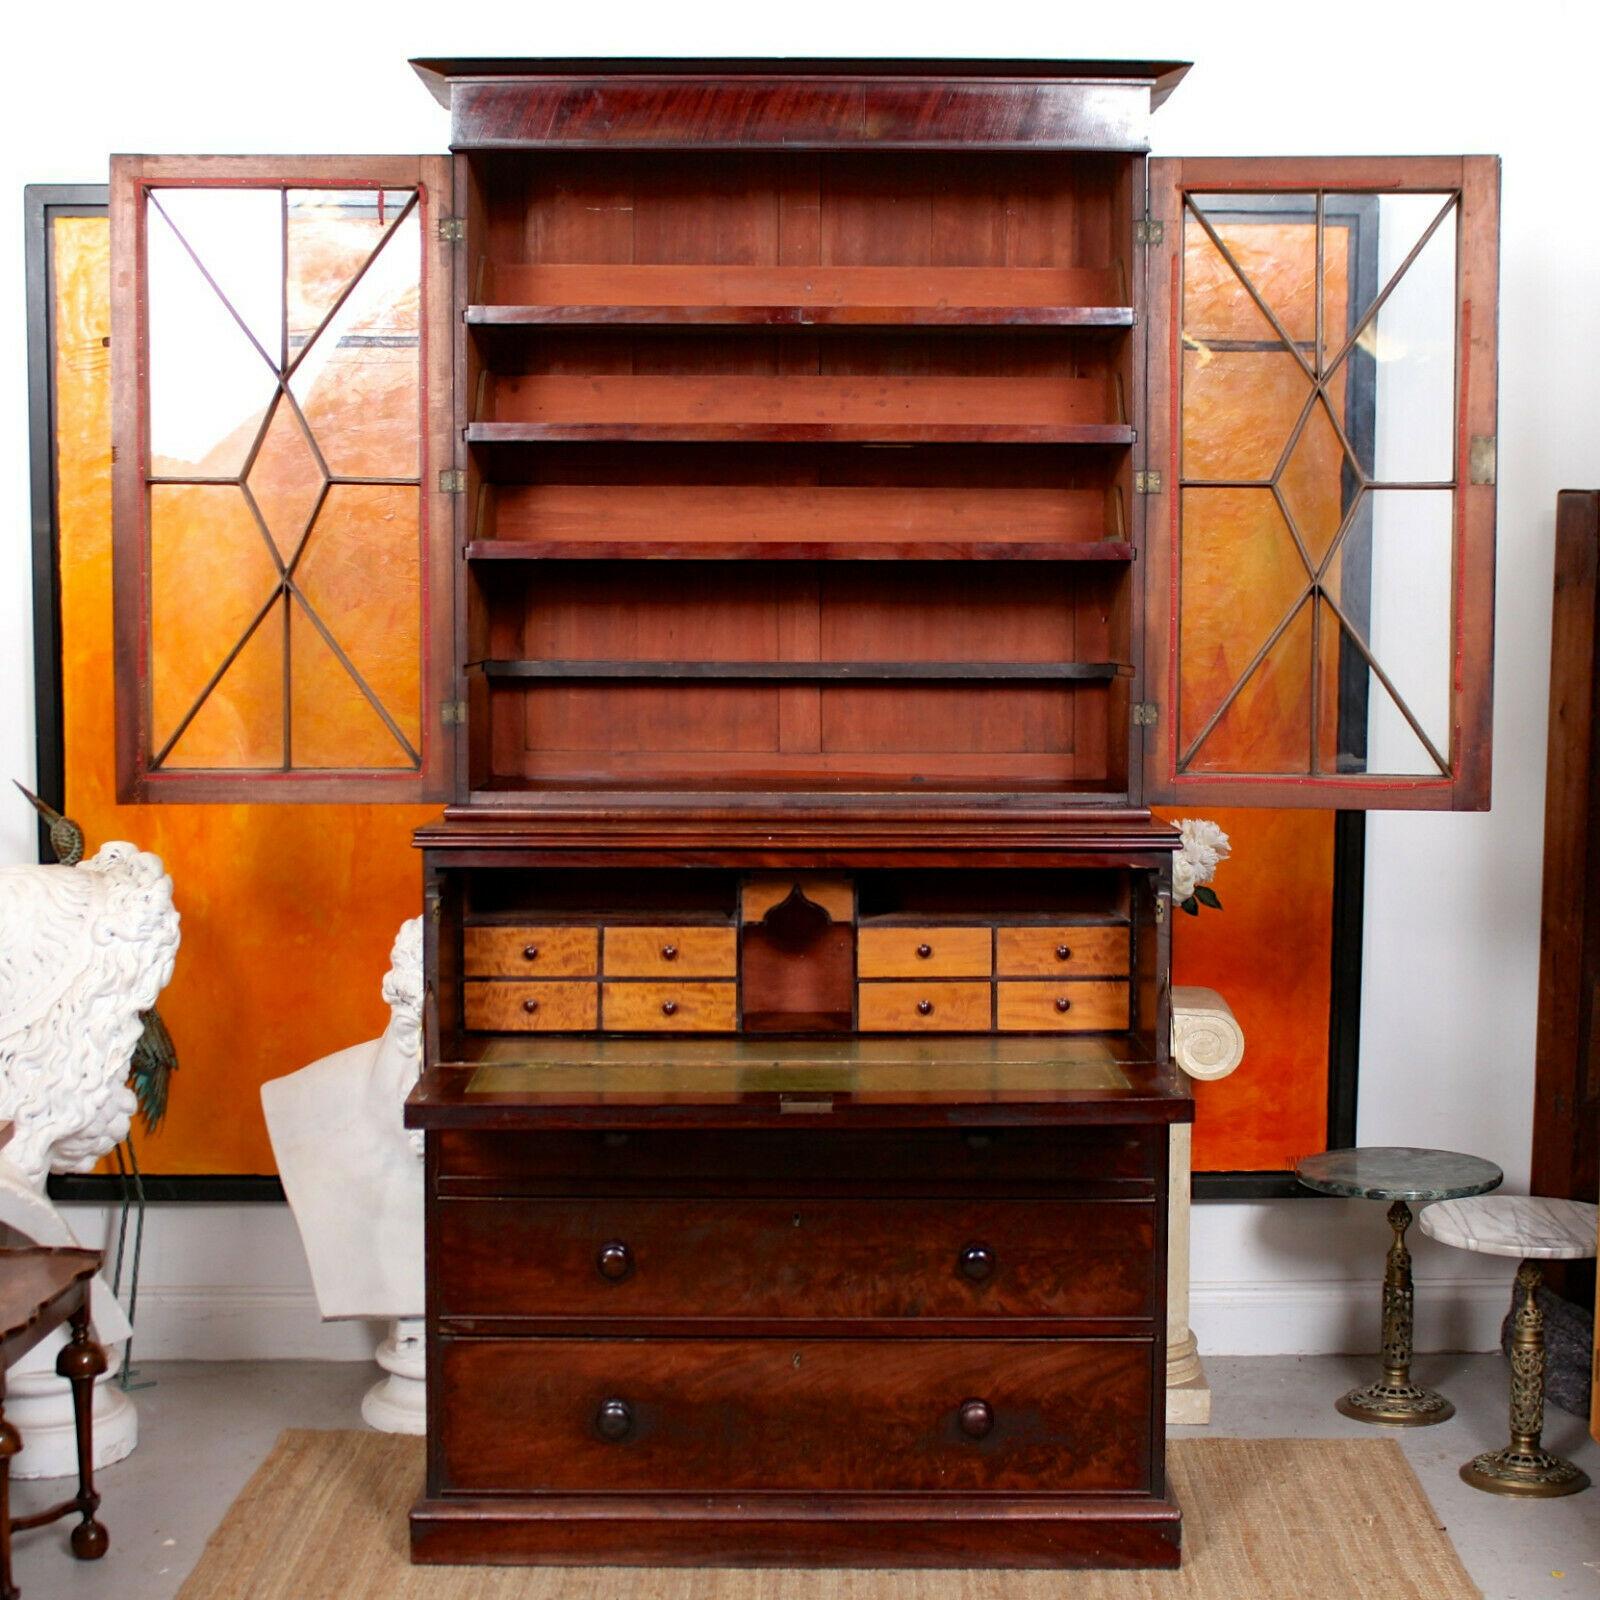 An attractive 19th century flamed mahogany glazed secrétaire.

The mahogany boasting a well figured flamed grain and rich patina.

The upper section with a projecting cornice above astragal glazed doors enclosed trays. The lower section with